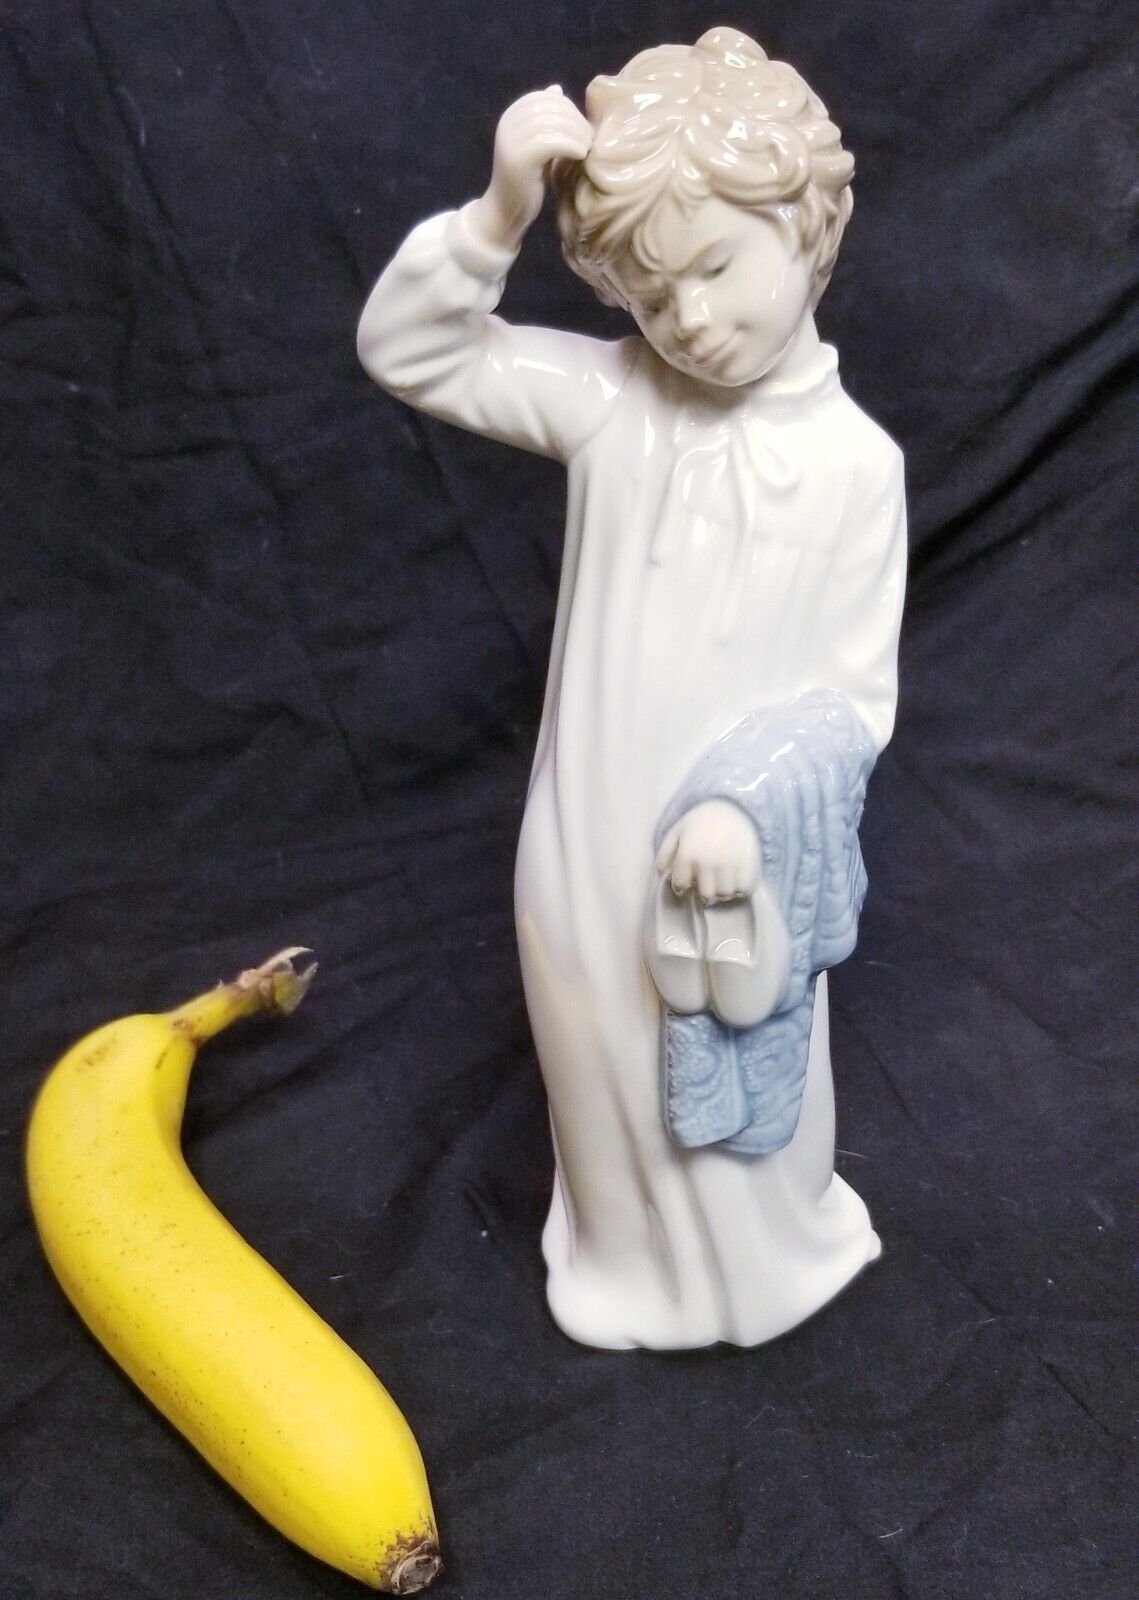 Vintage Lladro Boy with slippers Figurine #232 Porcelain glossy figurine nao